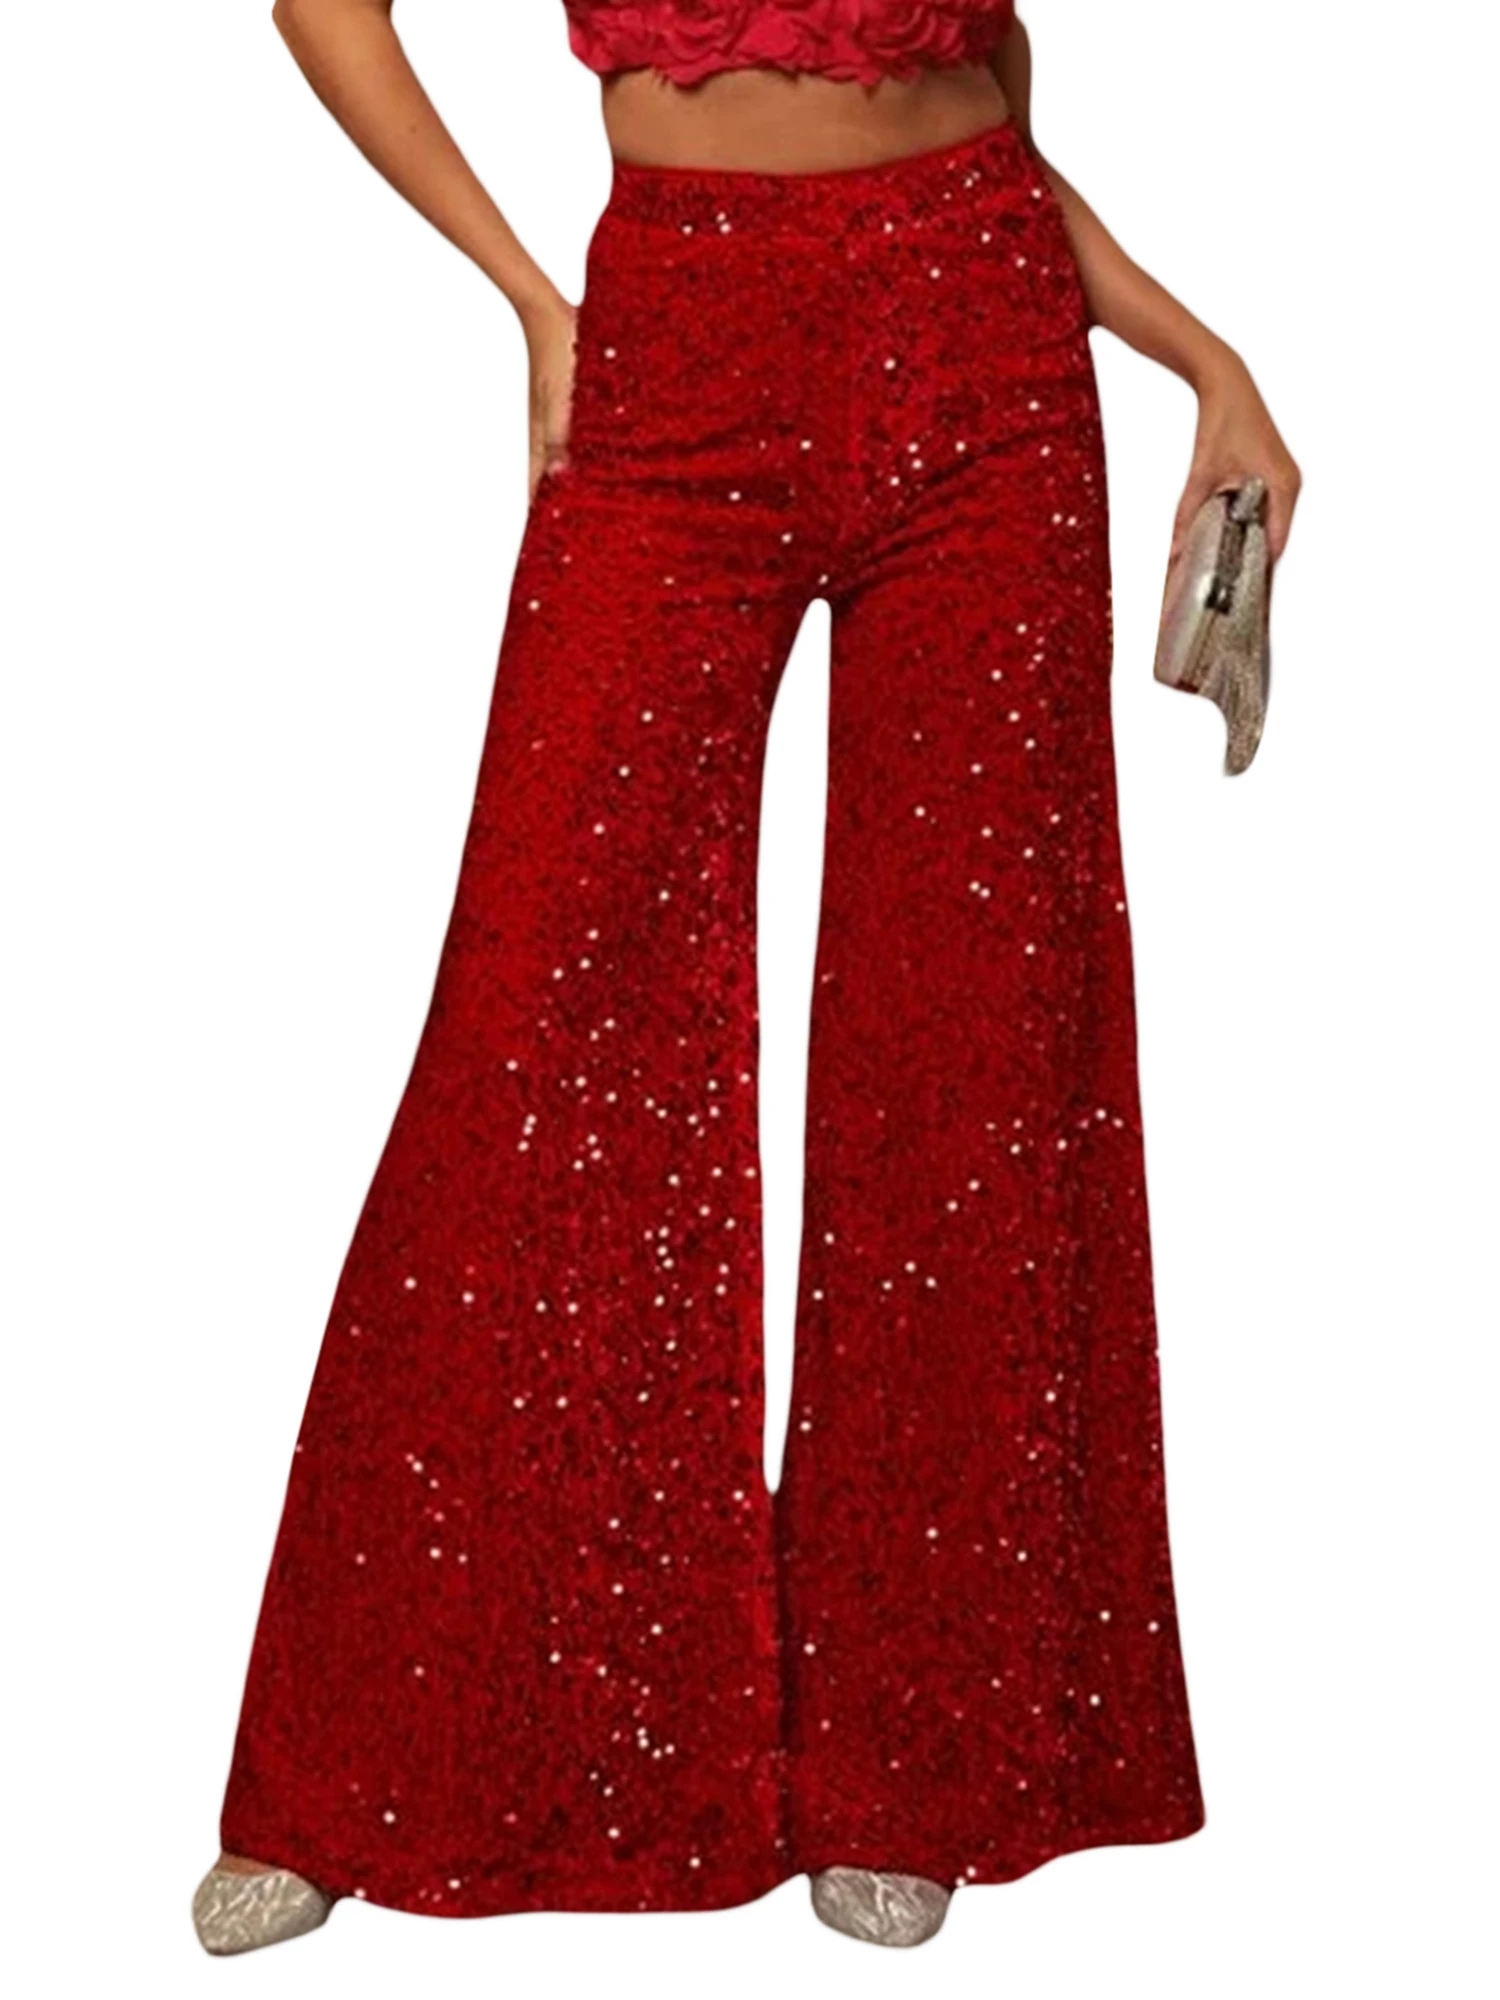 

Mesalynch Women Sequin Bell Bottom Pants Sparkly High Waist Wide Leg Palazzo Pants Vintage Glitter Flared Trousers Streetwear